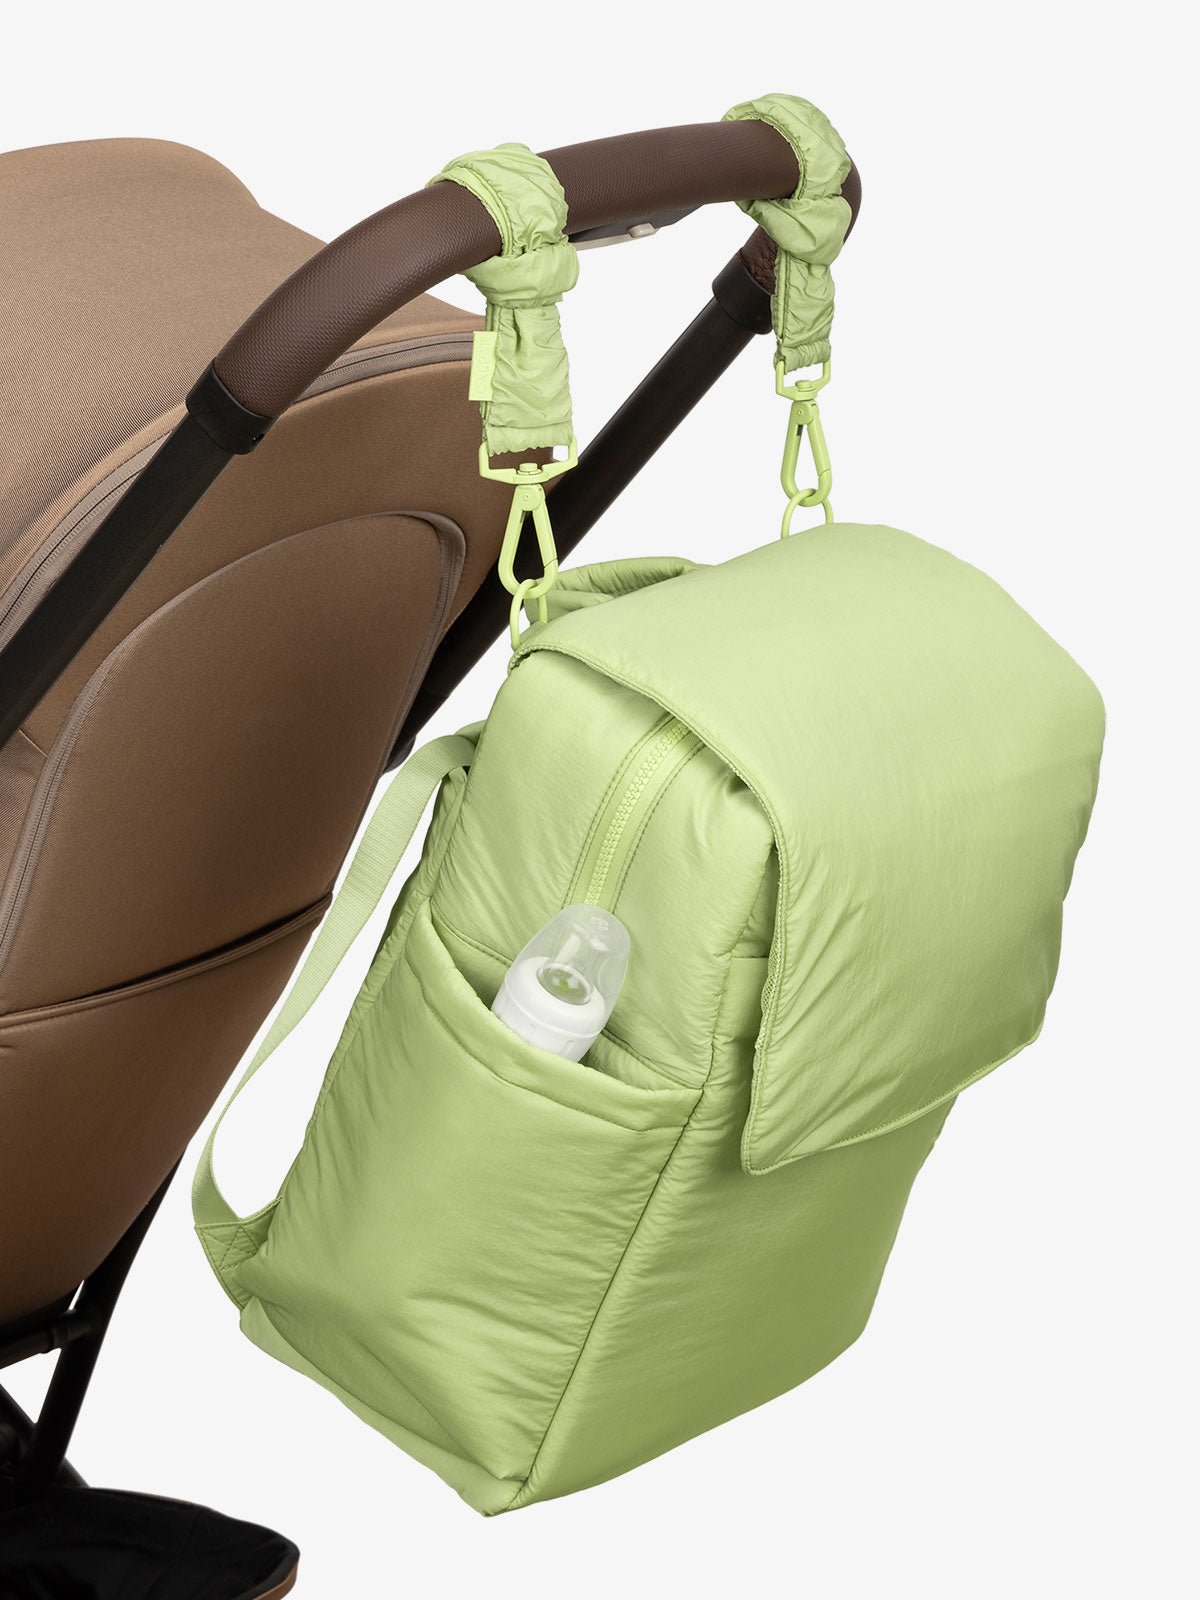 CALPAK Diaper Backpack with Laptop Sleeve attached to stroller by CALPAK Stroller Straps in lime